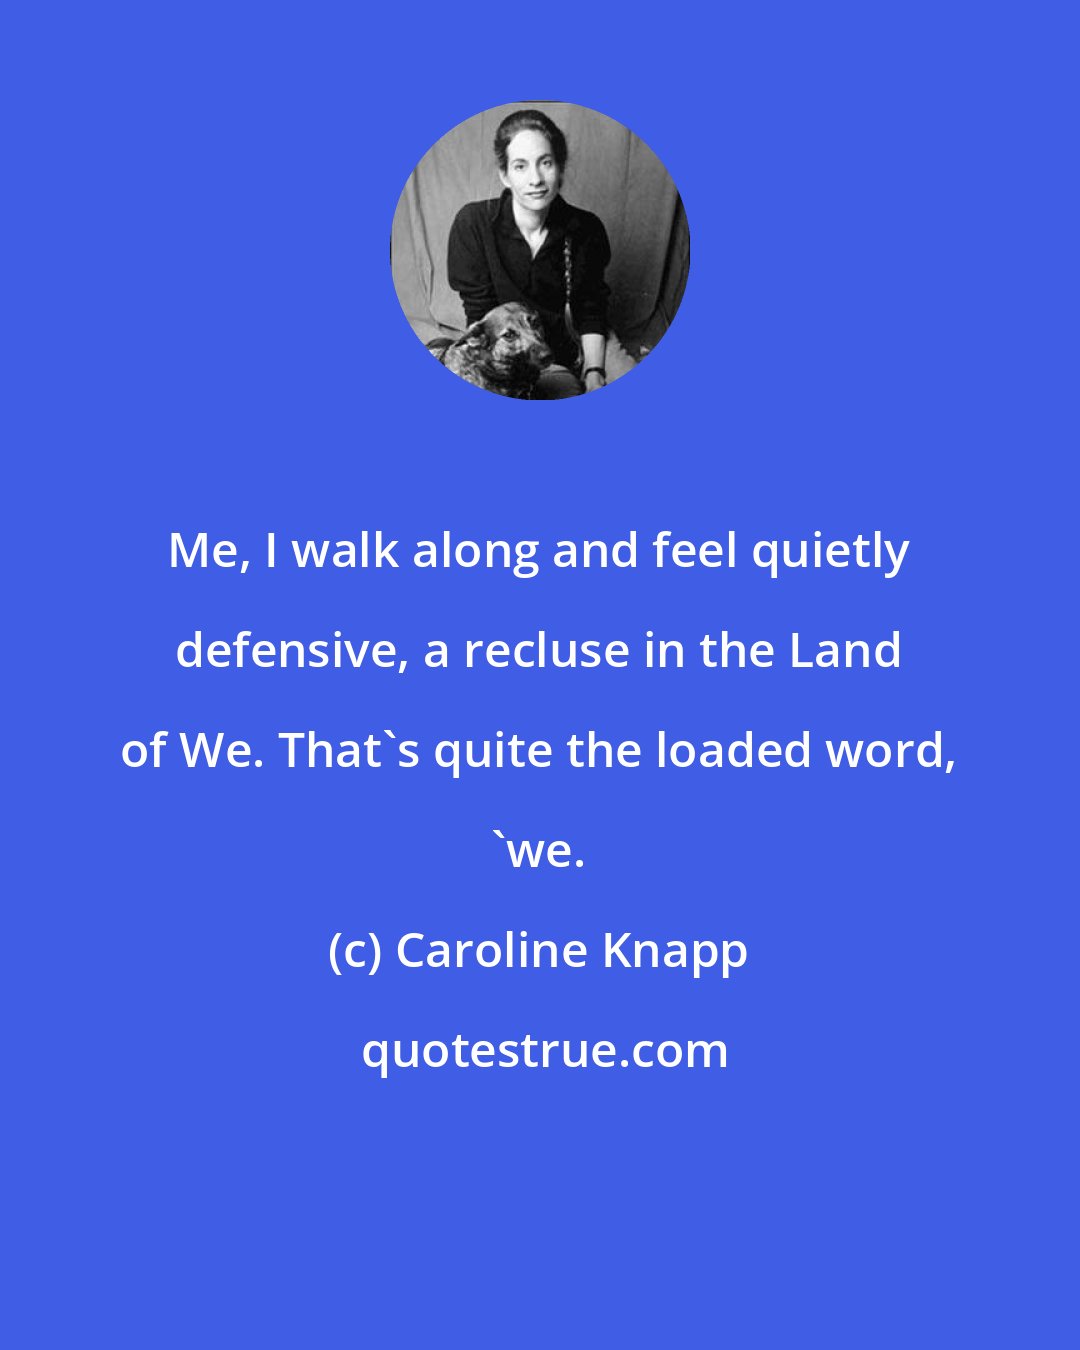 Caroline Knapp: Me, I walk along and feel quietly defensive, a recluse in the Land of We. That's quite the loaded word, 'we.